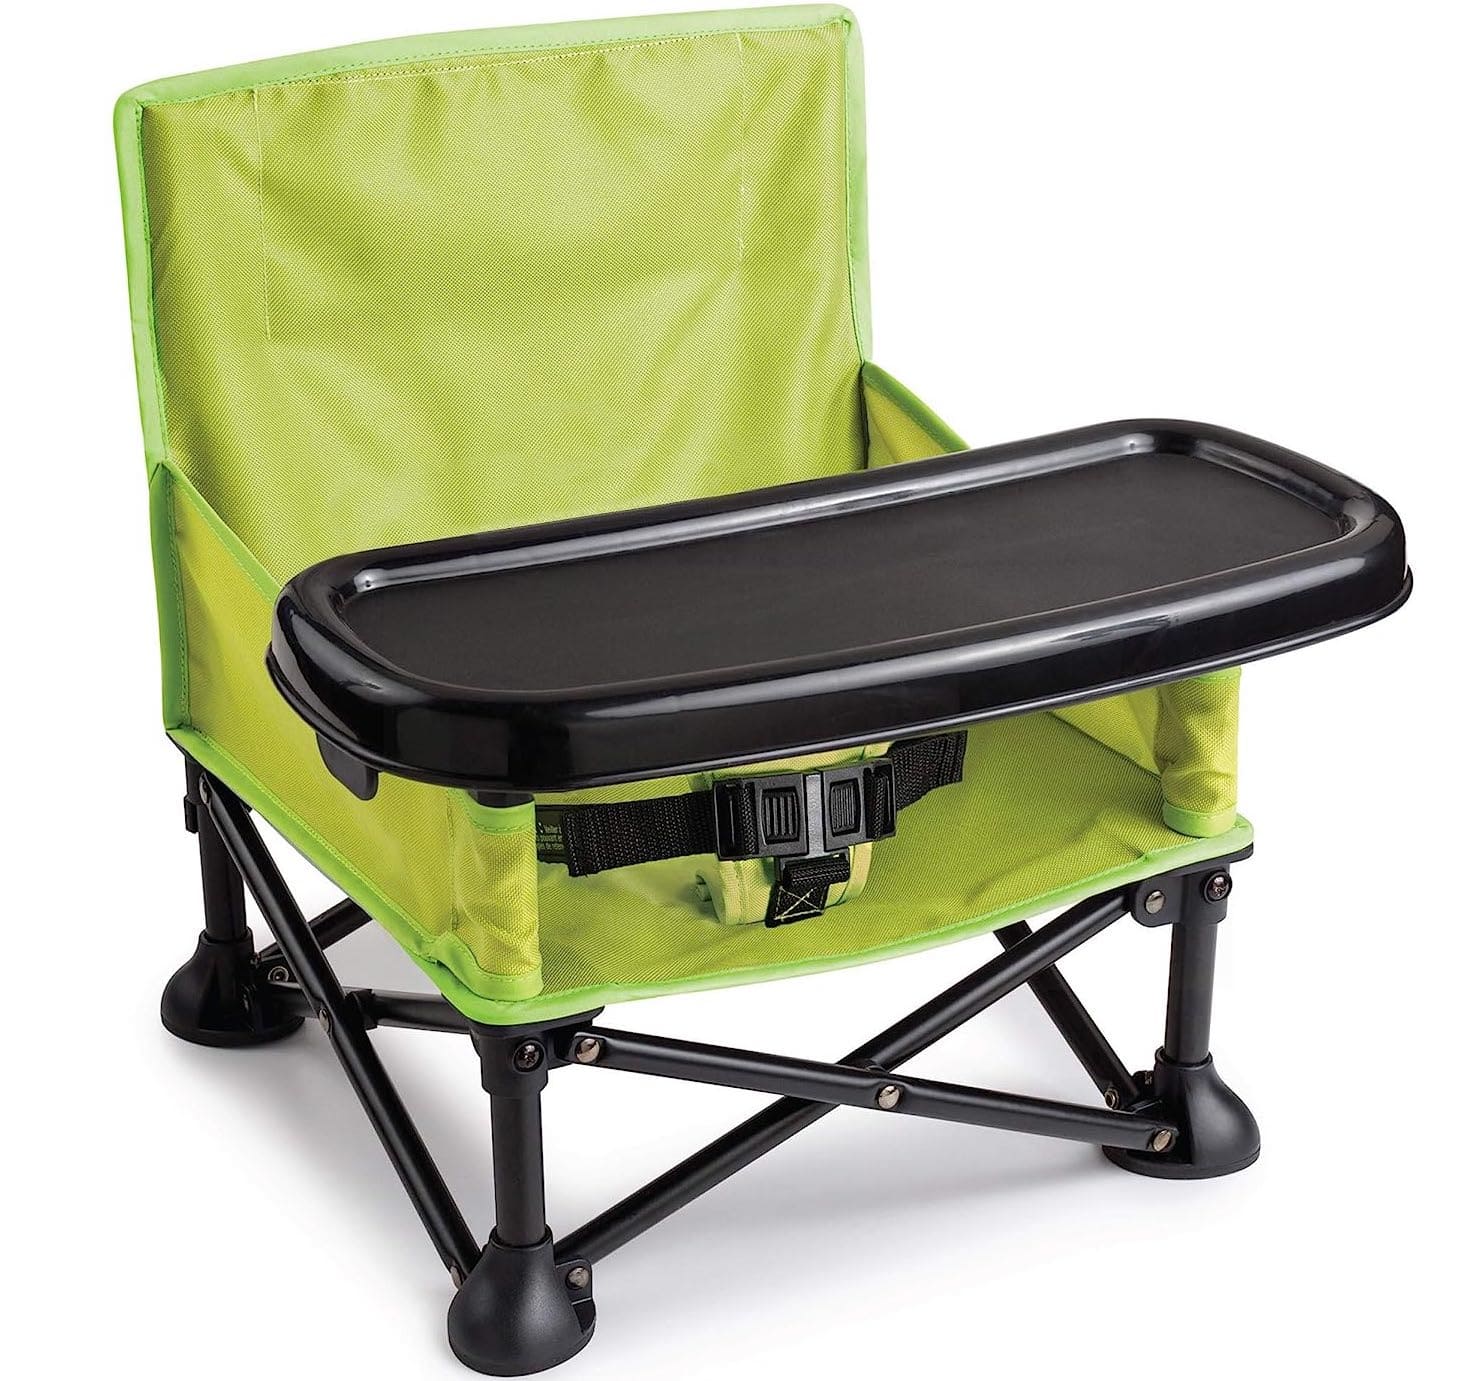 Portable booster seat and high chair 